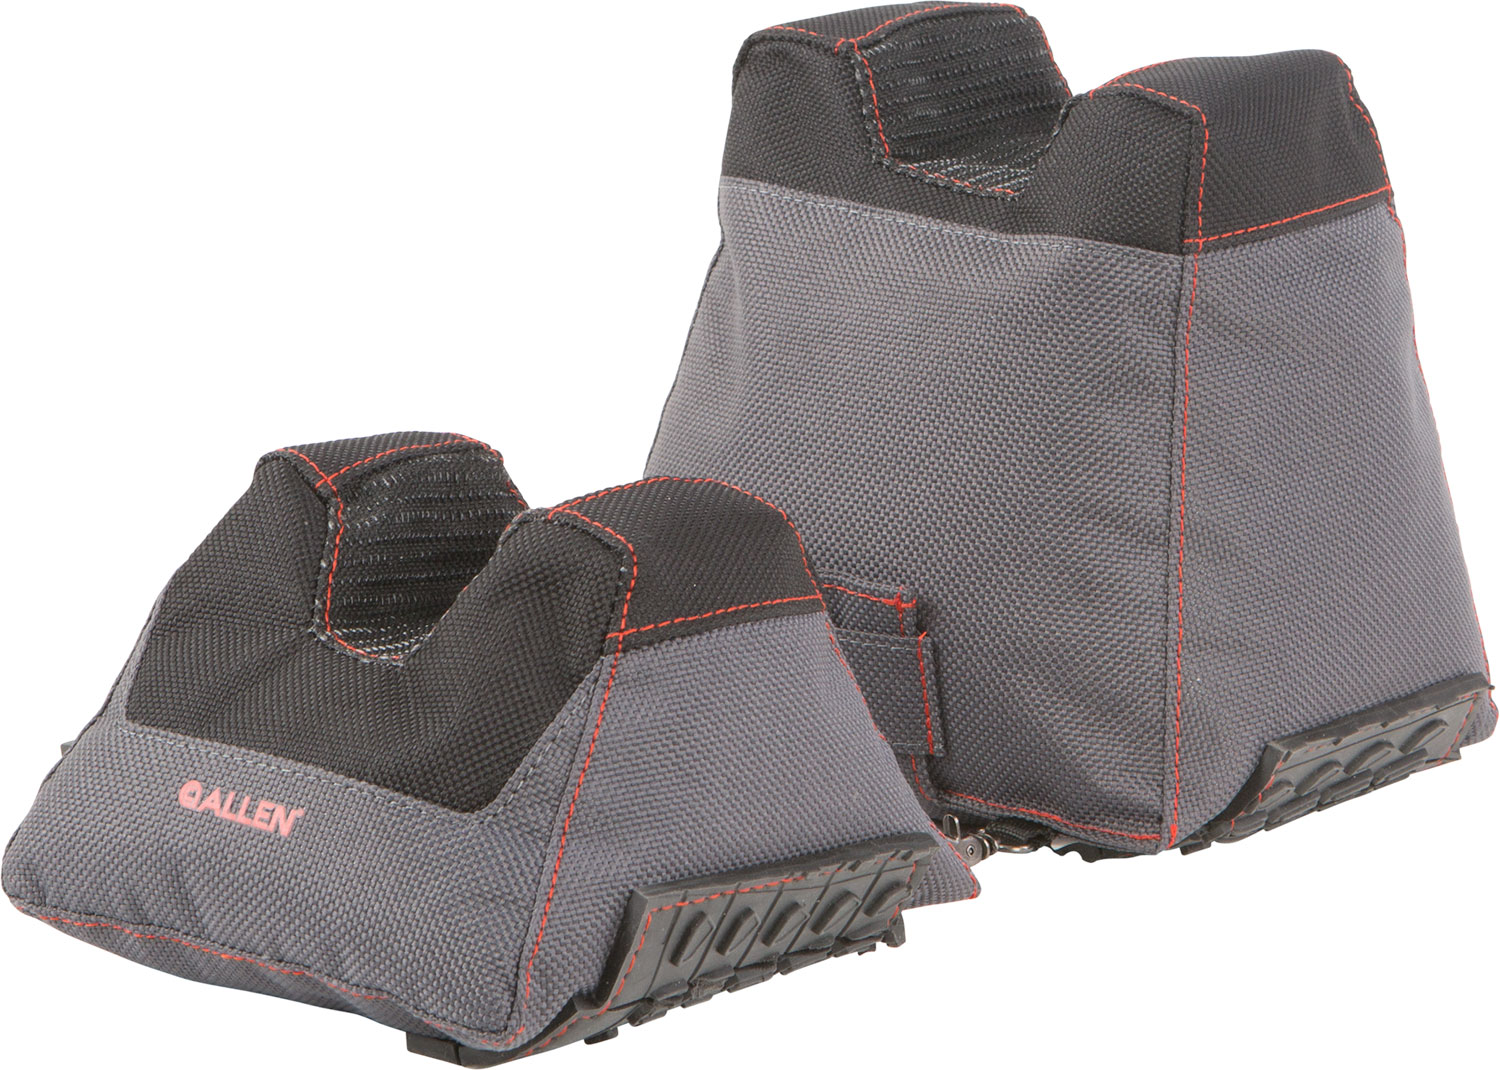 ALLEN THERMOBLOCK FRONT AND REAR BAG FILLED BLK/GRAY